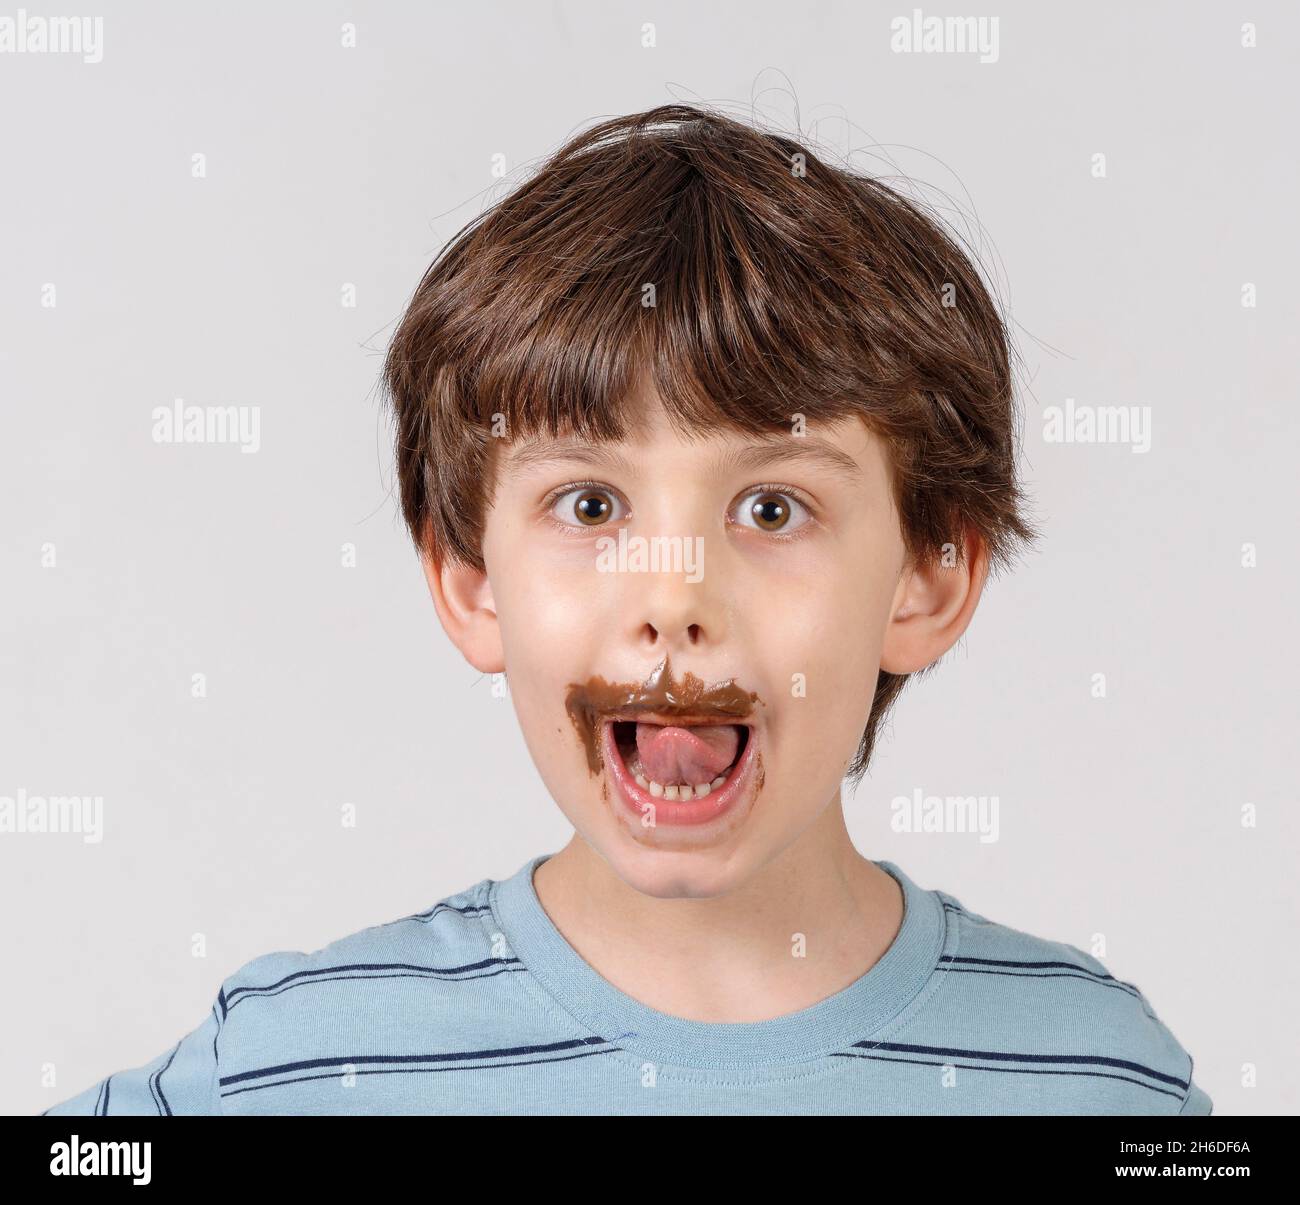 Portrait of a young boy enjoying his chocolate spread Stock Photo